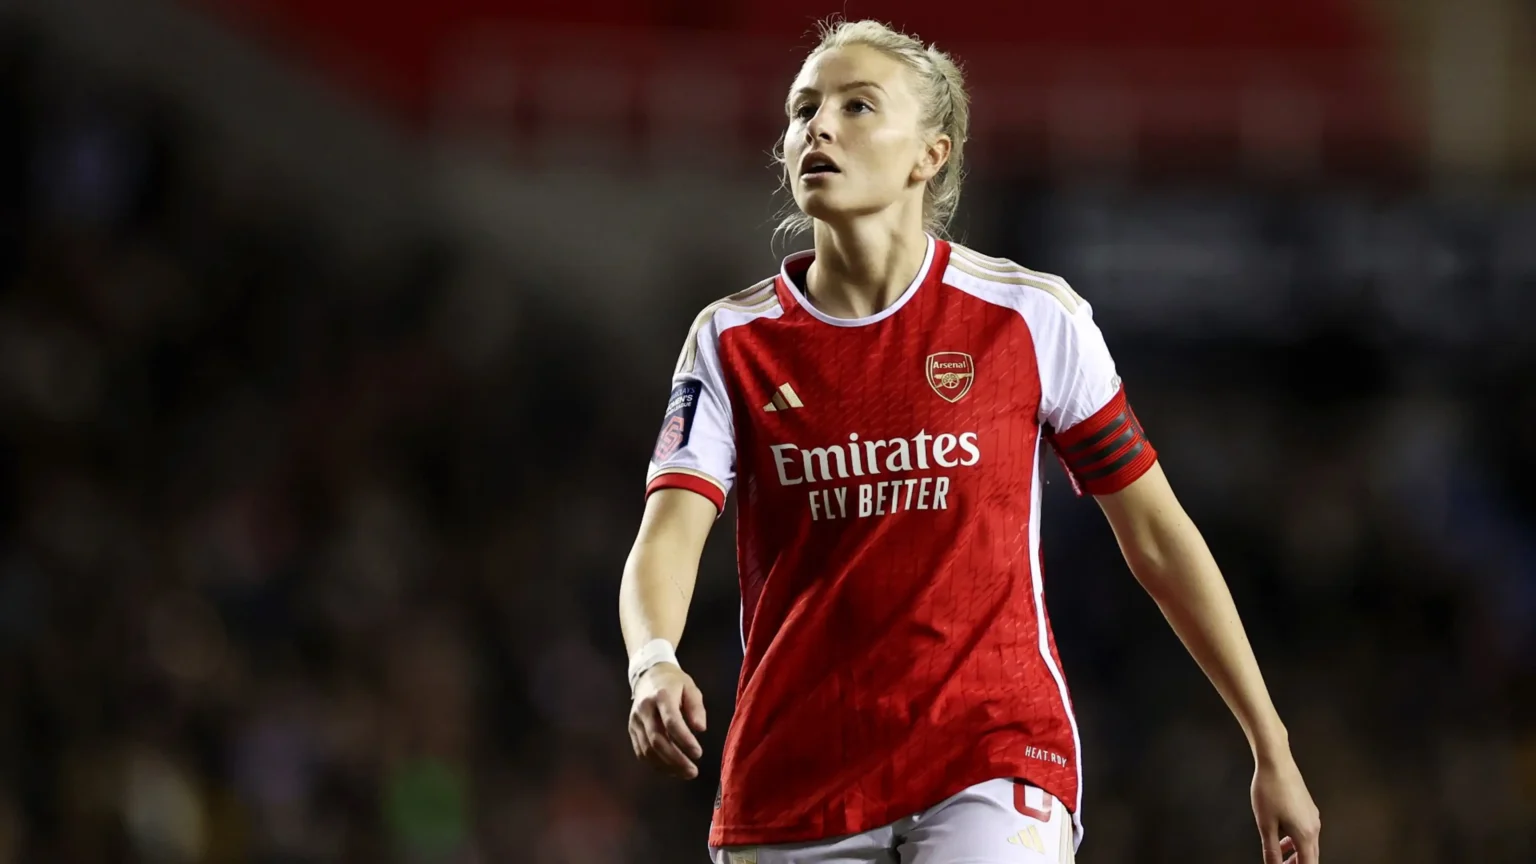 England skipper Leah Williamson back in Arsenal squad after ACL injury 